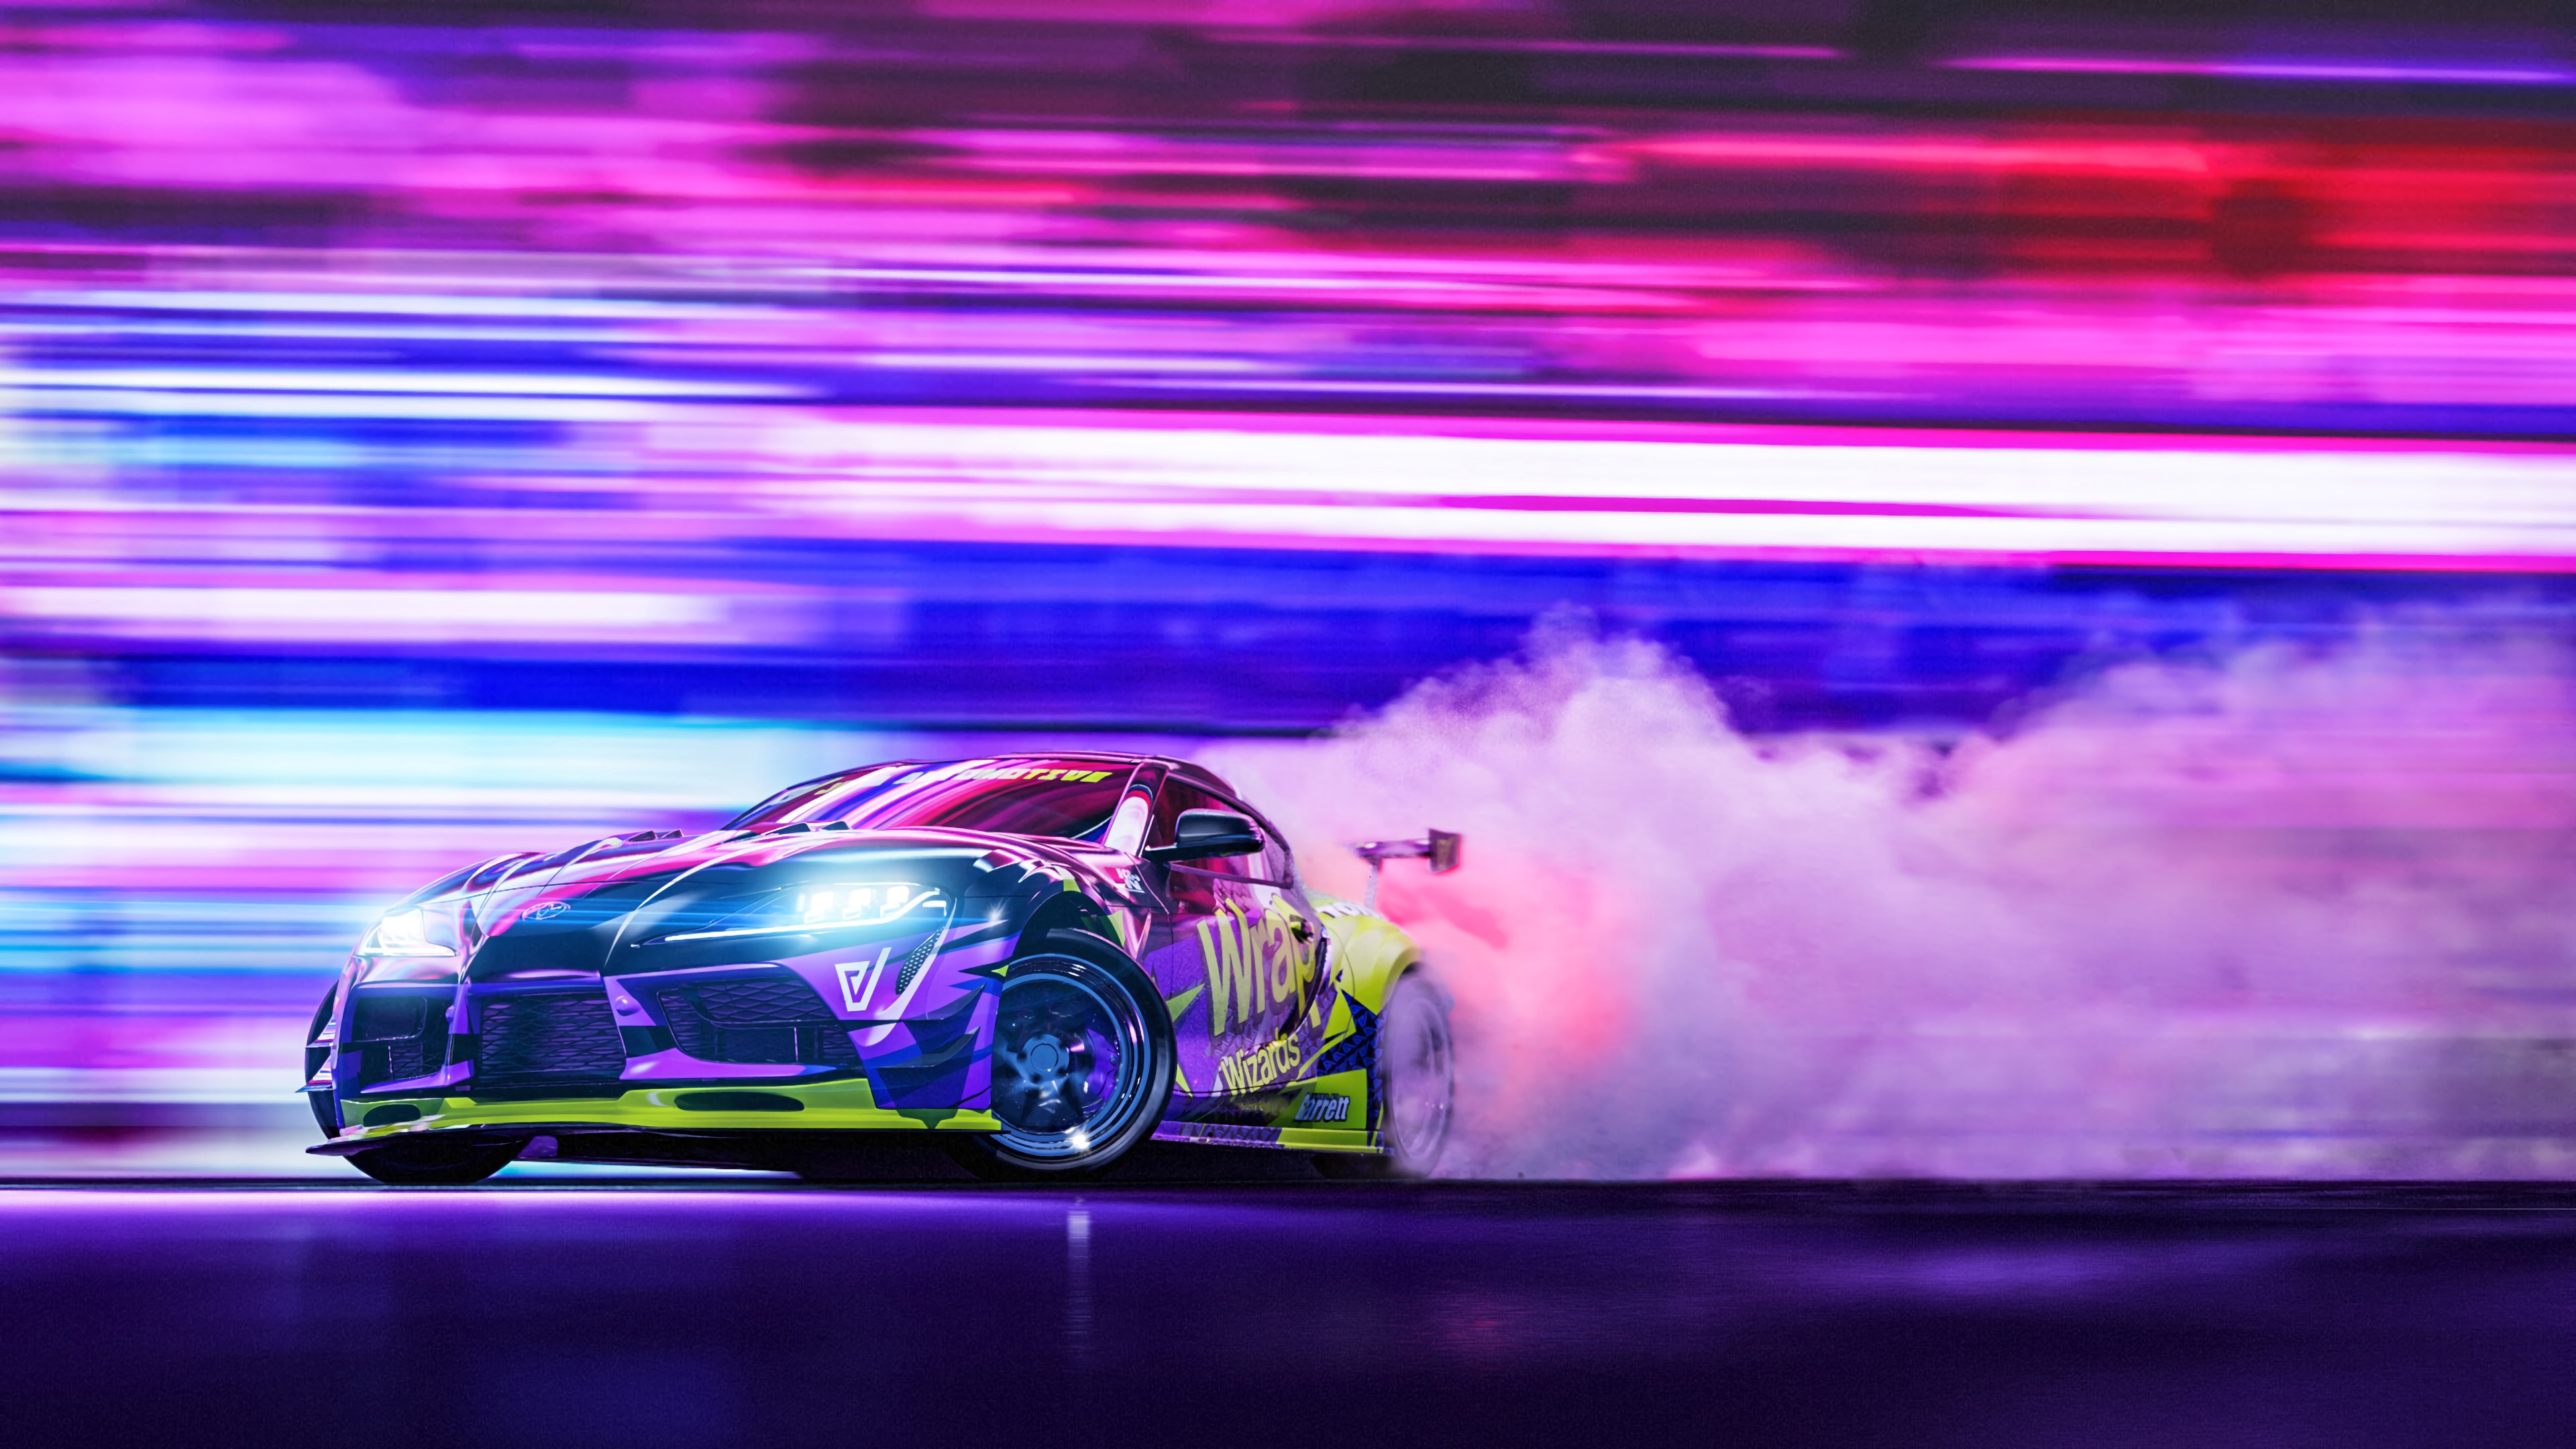 65097 download wallpaper cars, neon, sports, smoke, sports car, speed, drift screensavers and pictures for free